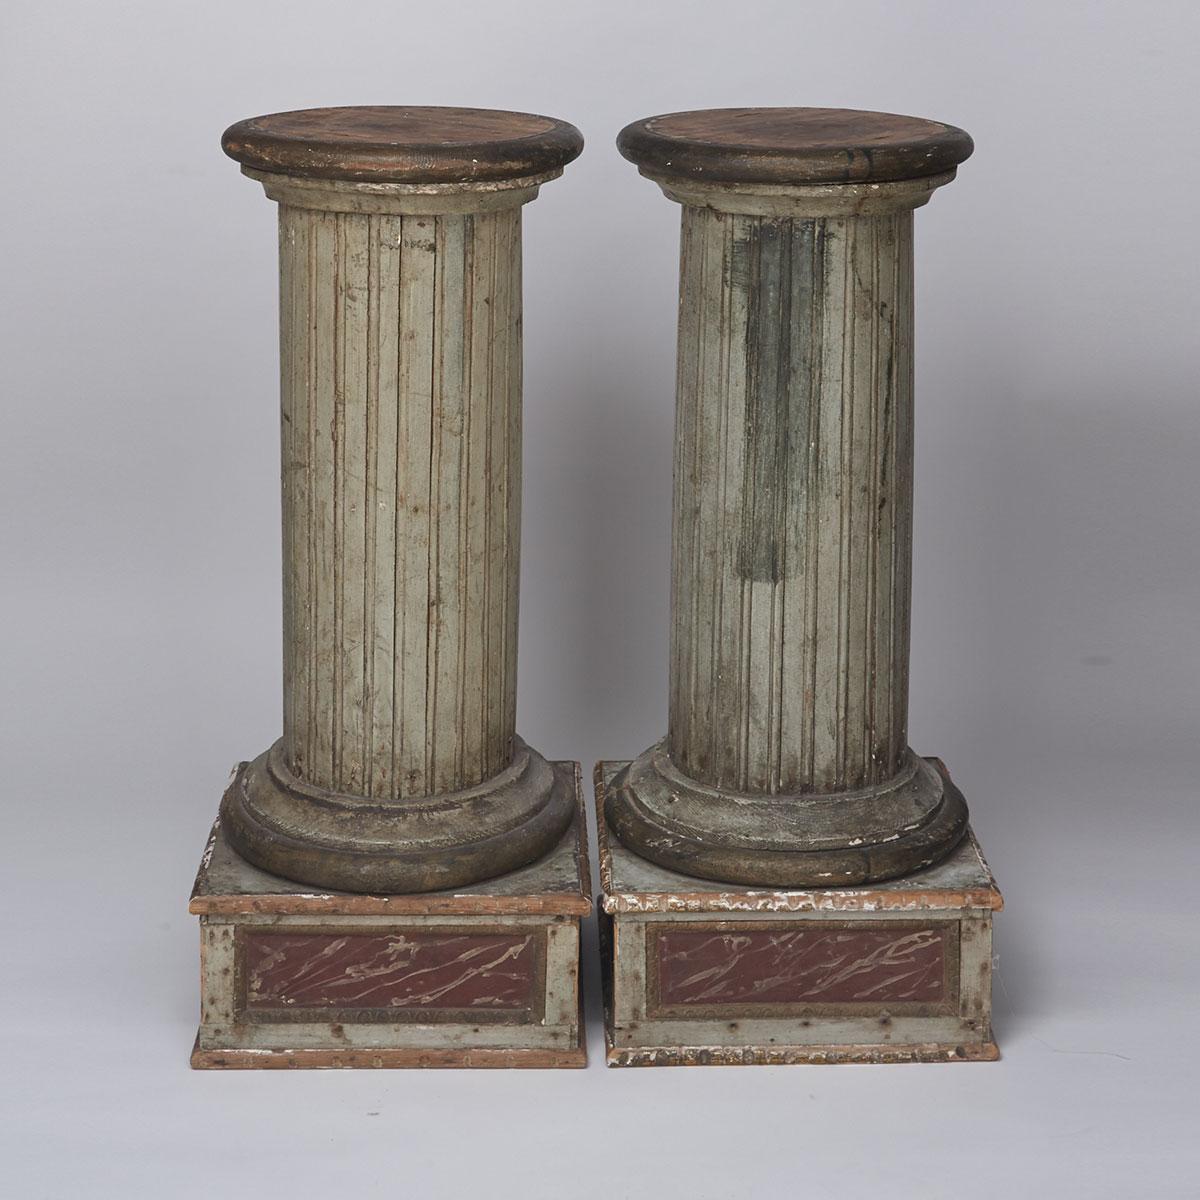 Pair of Italian Painted and Parcel Gilt Wood Column Form Pedestals, 19th century